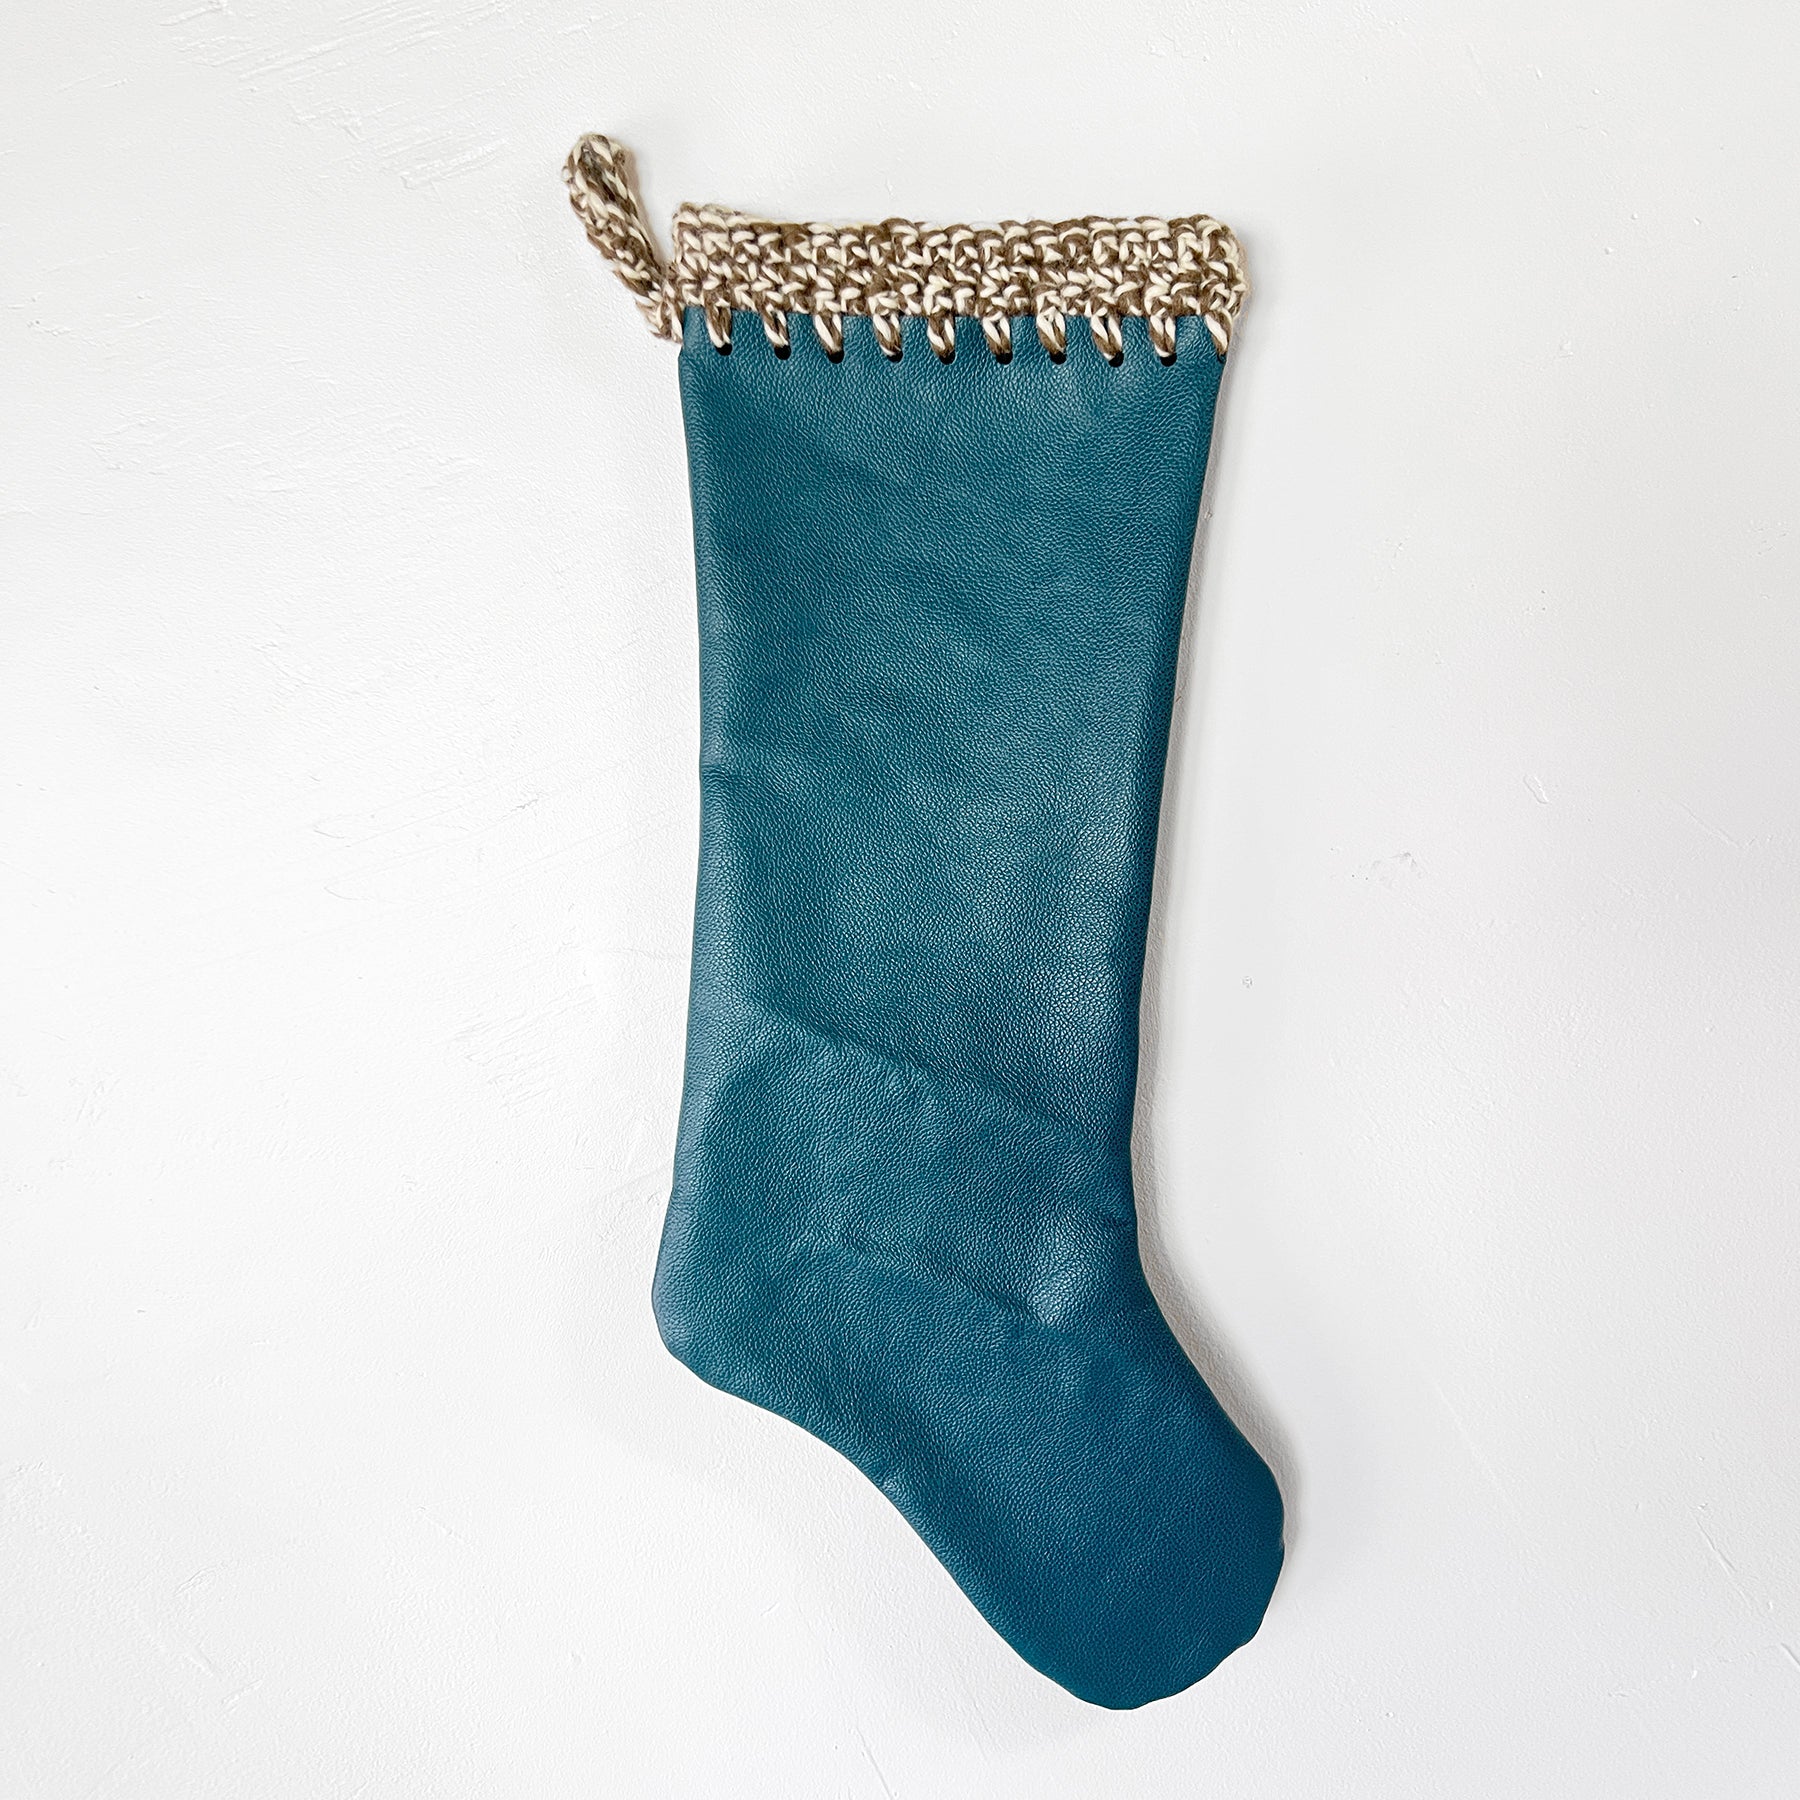 Teal Leather with Vintage Yarn Hand Crochet Trim Christmas Stocking